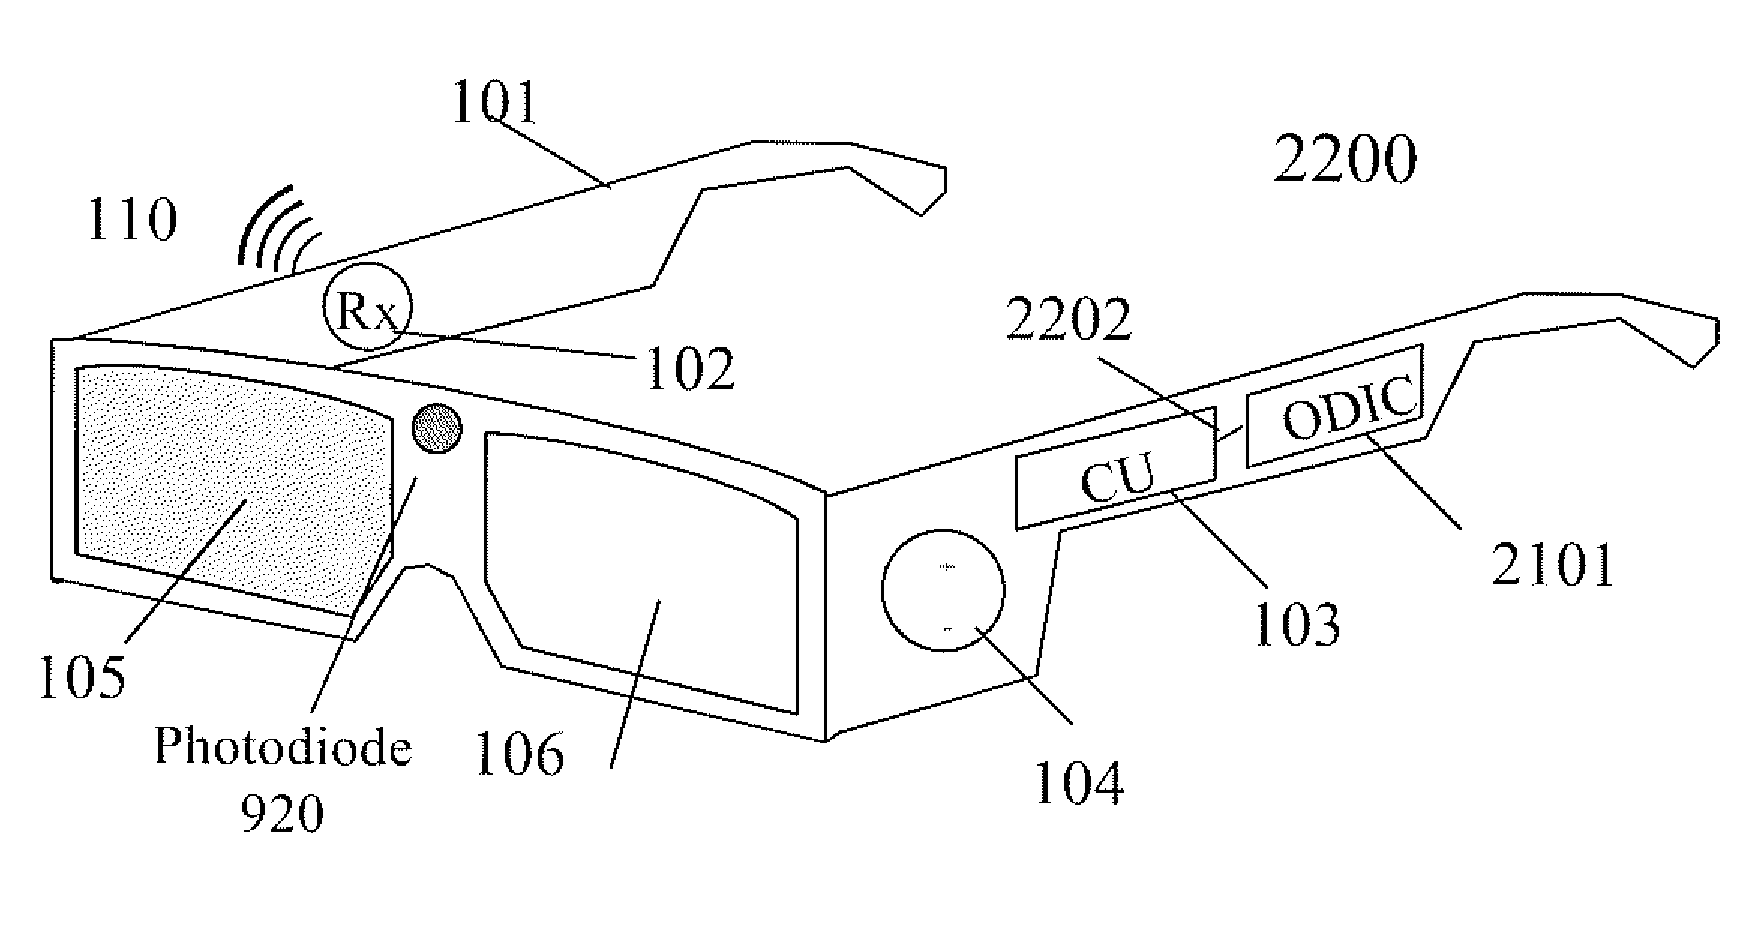 Continuous adjustable 3deeps filter spectacles for optimized 3deeps stereoscopic viewing and its control method and means